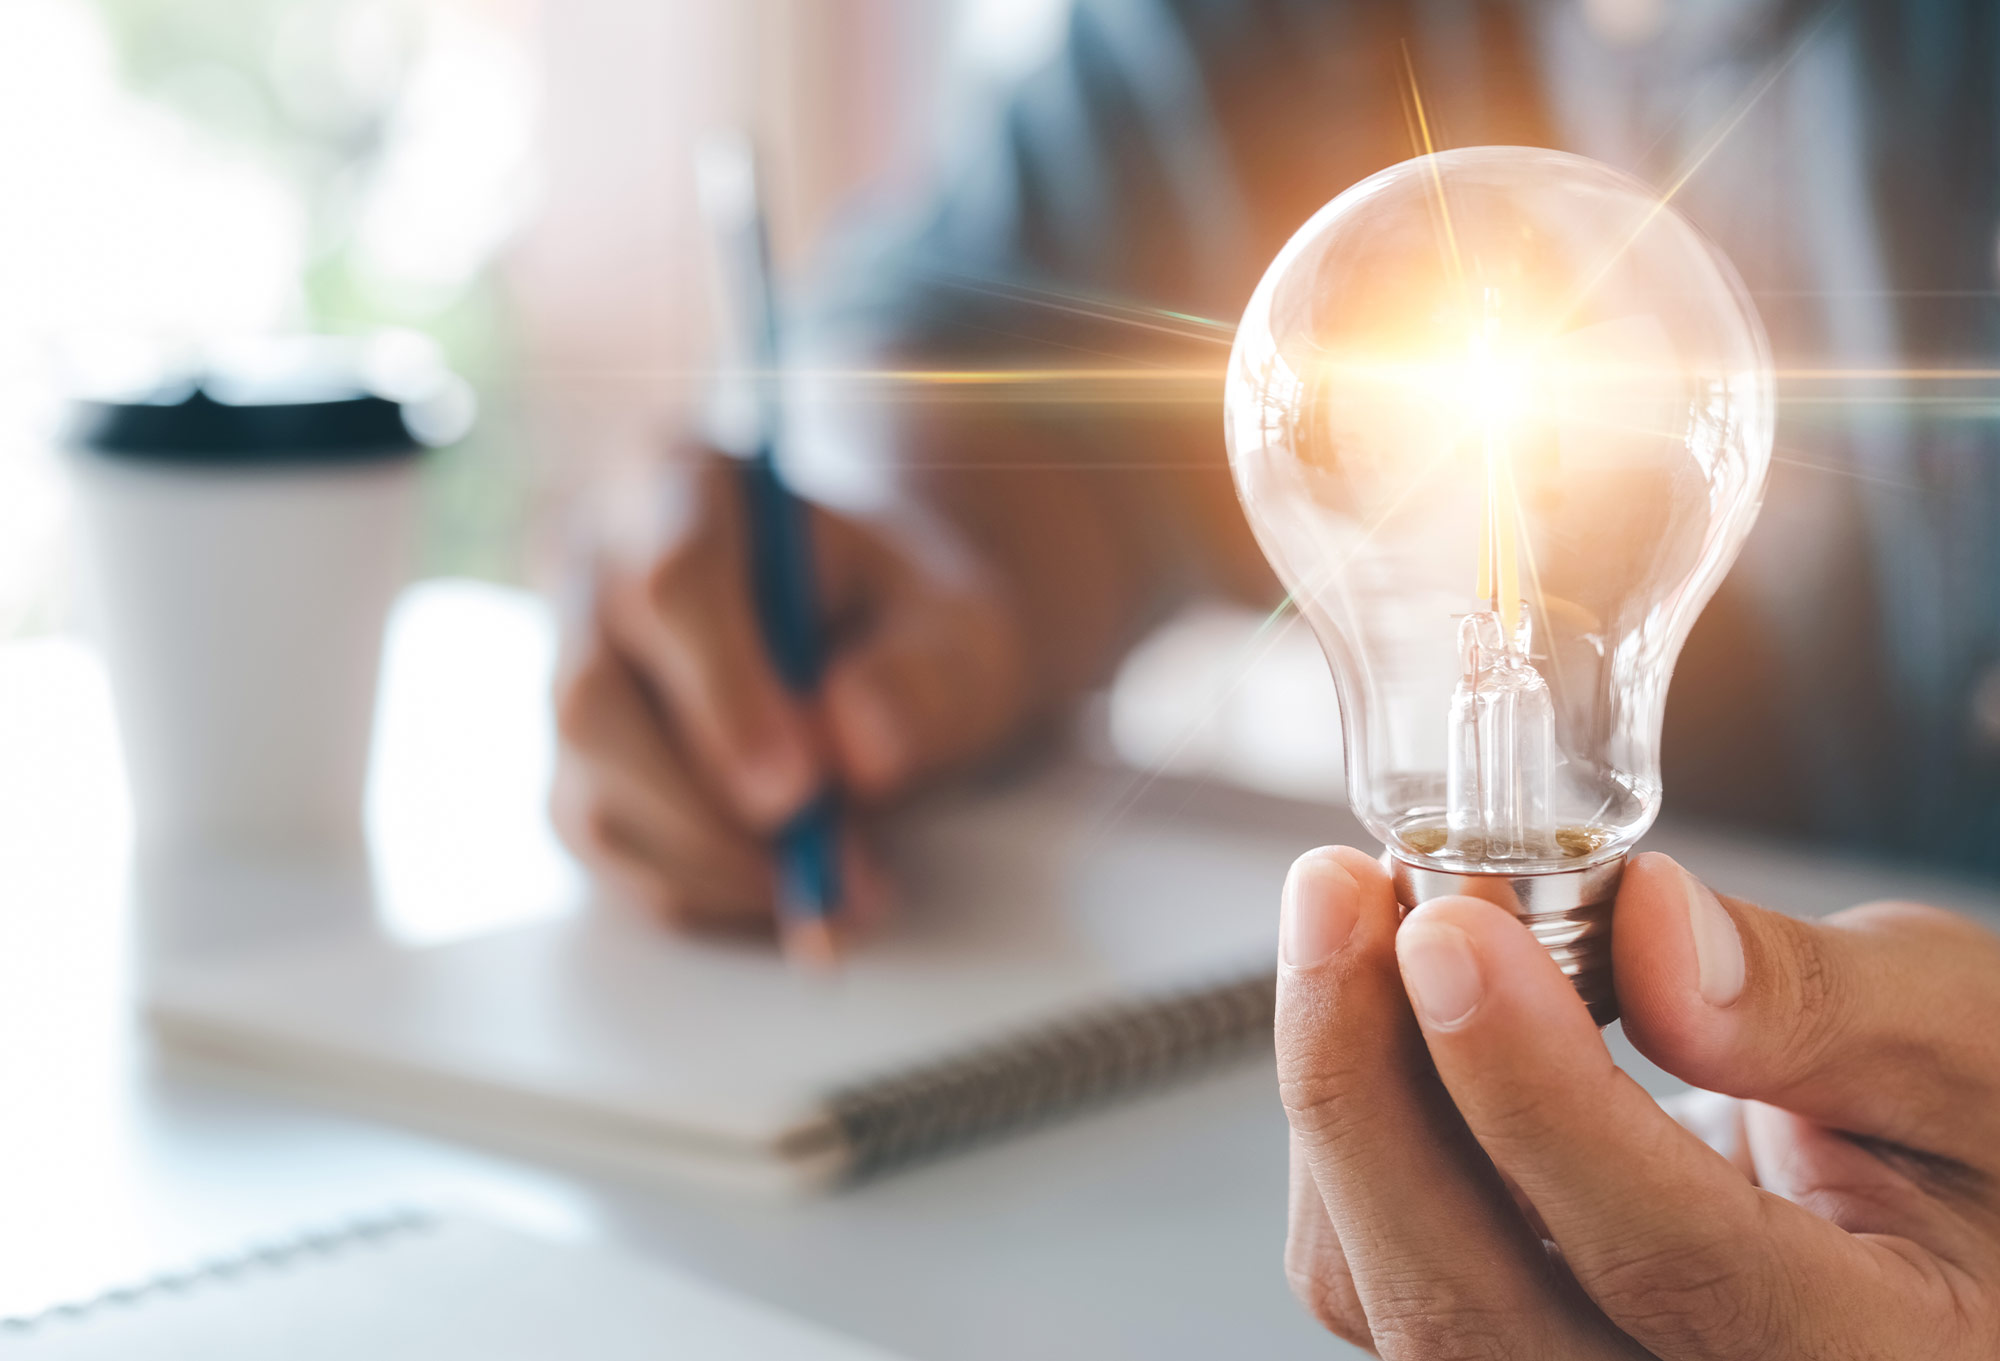 a left hand holds a glowing lightbulb in the focus in the foreground while the right hands writes in a notebook out of focus in the background